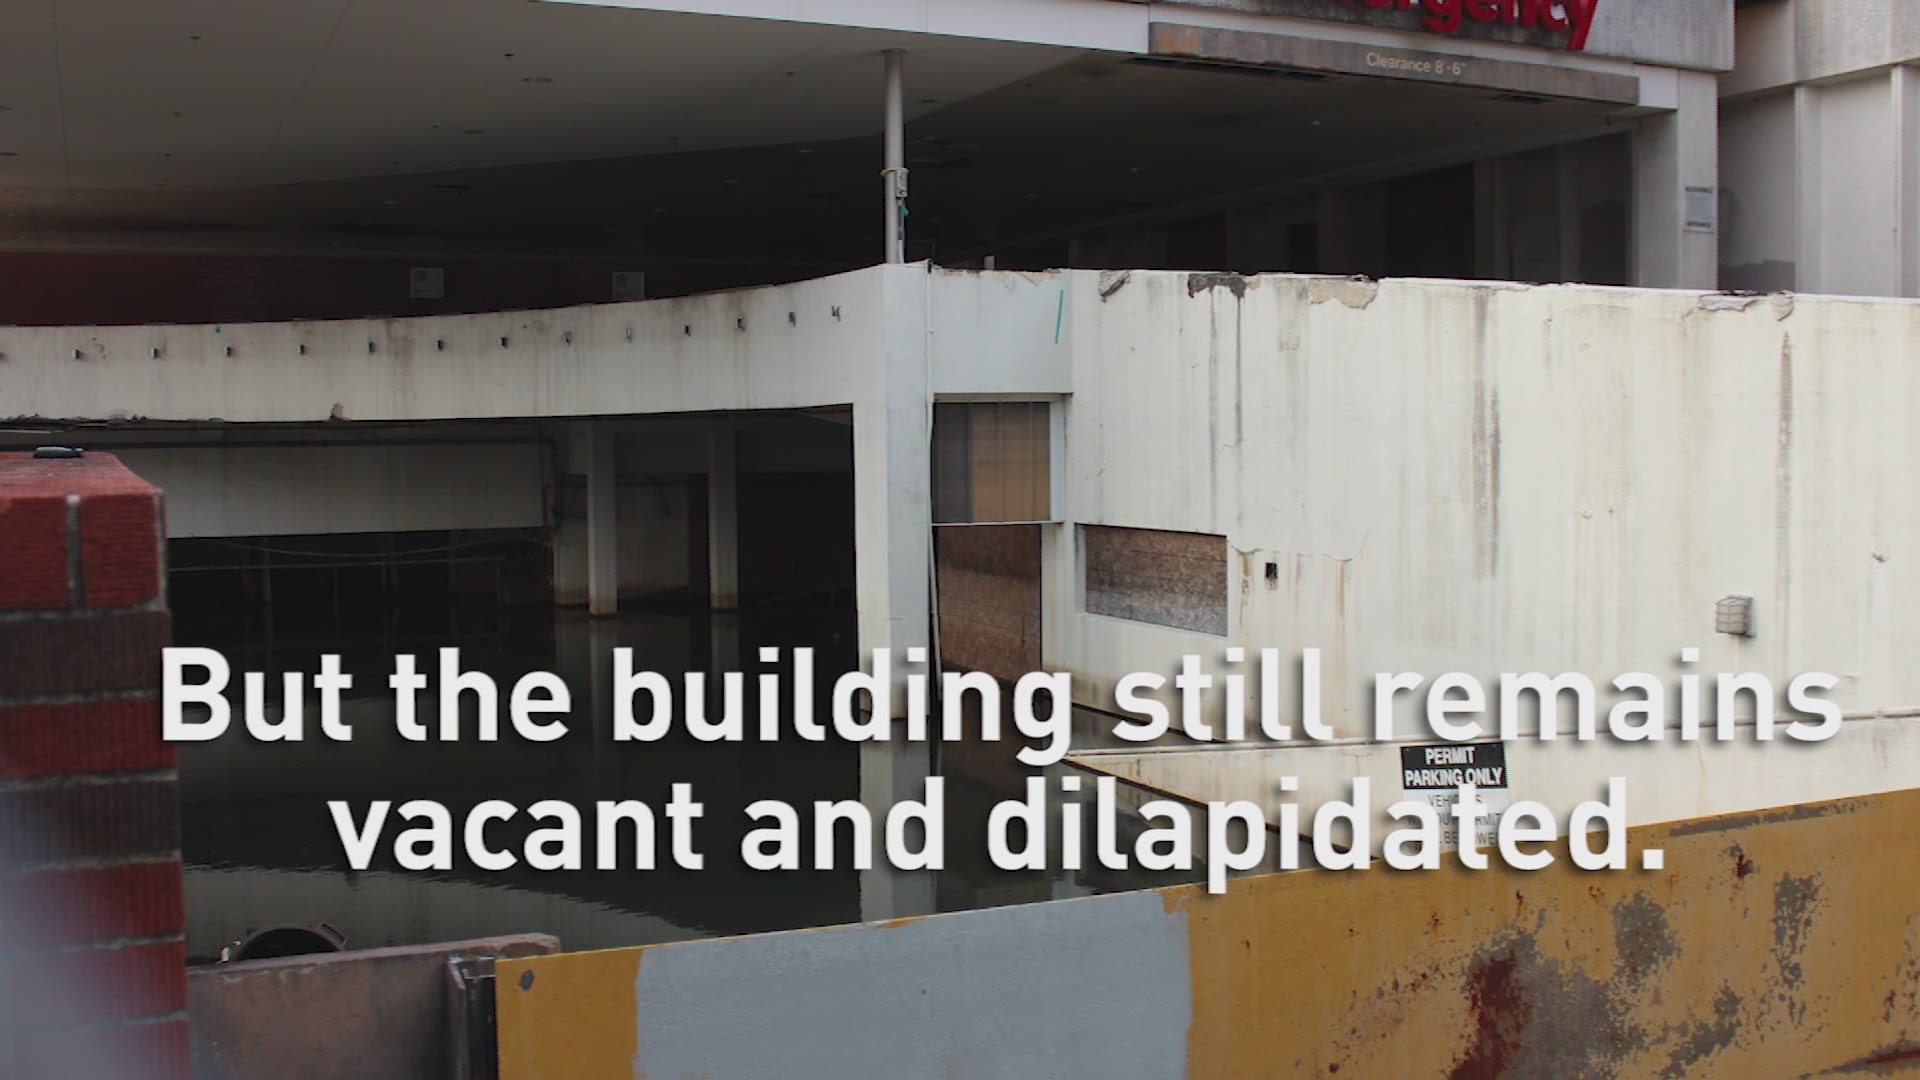 For more than a decade, the site has been vacant with no clear plans for its future in sight.